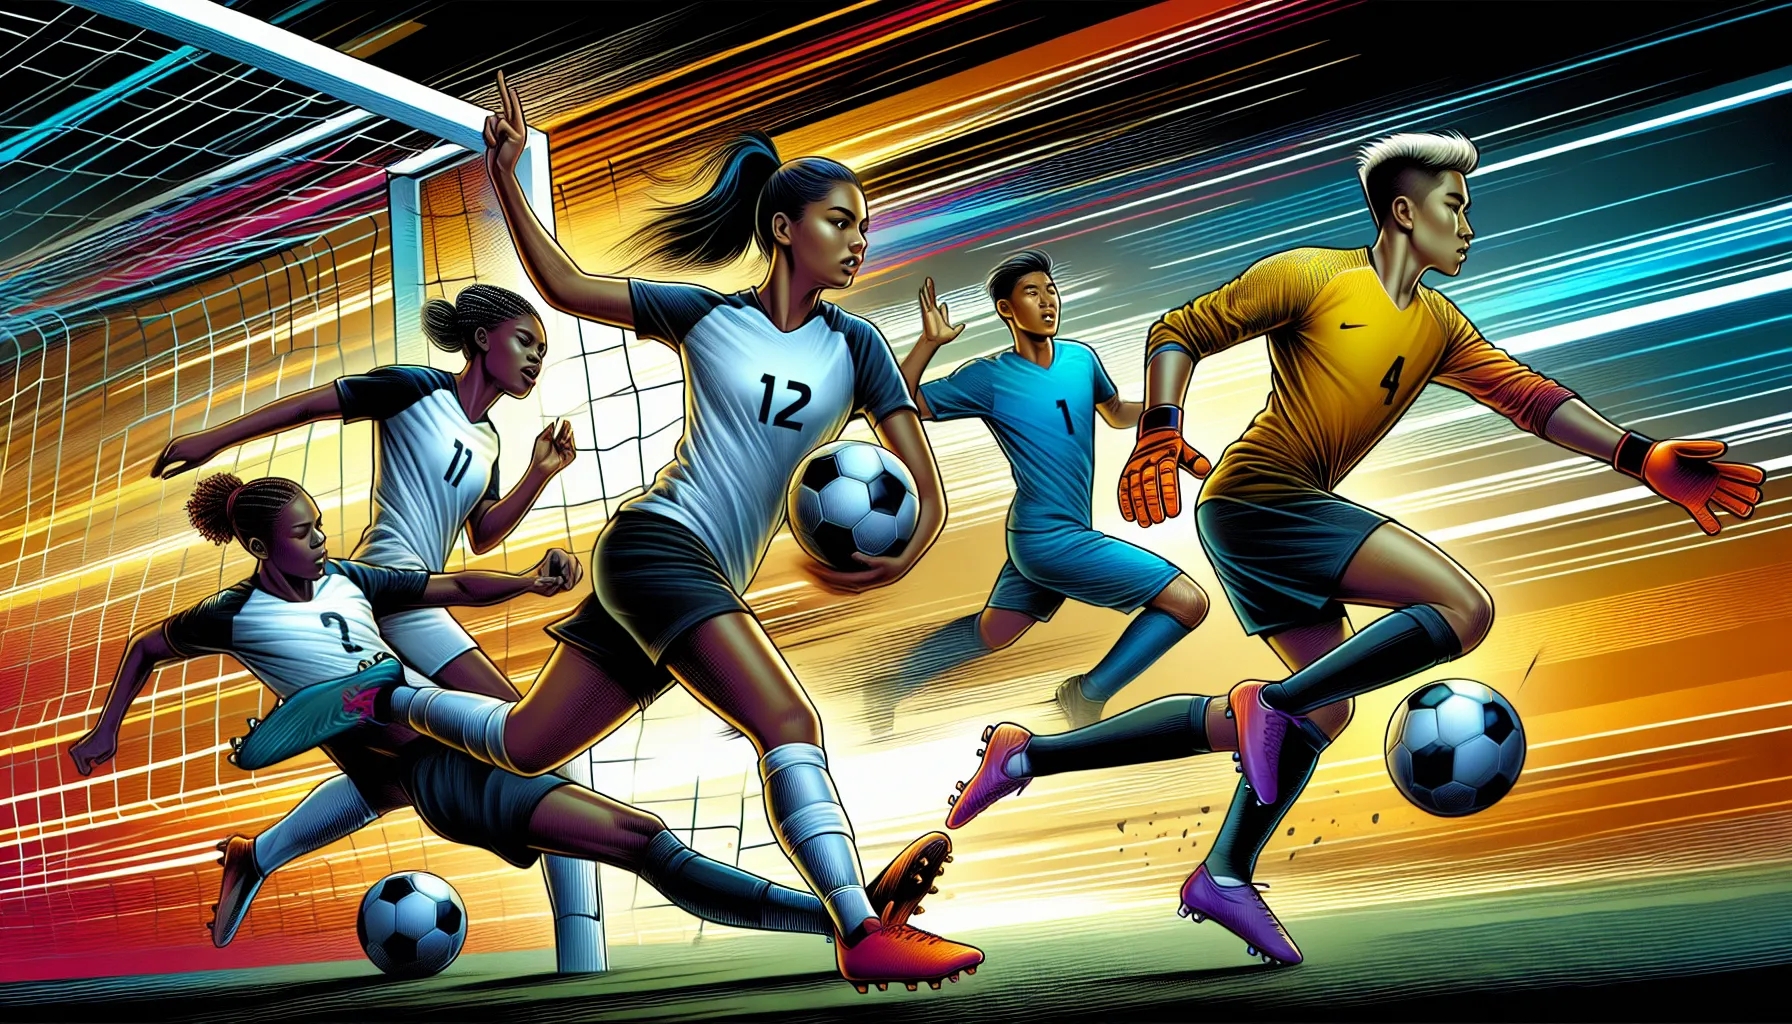 The Diversity of Soccer Leagues in the US